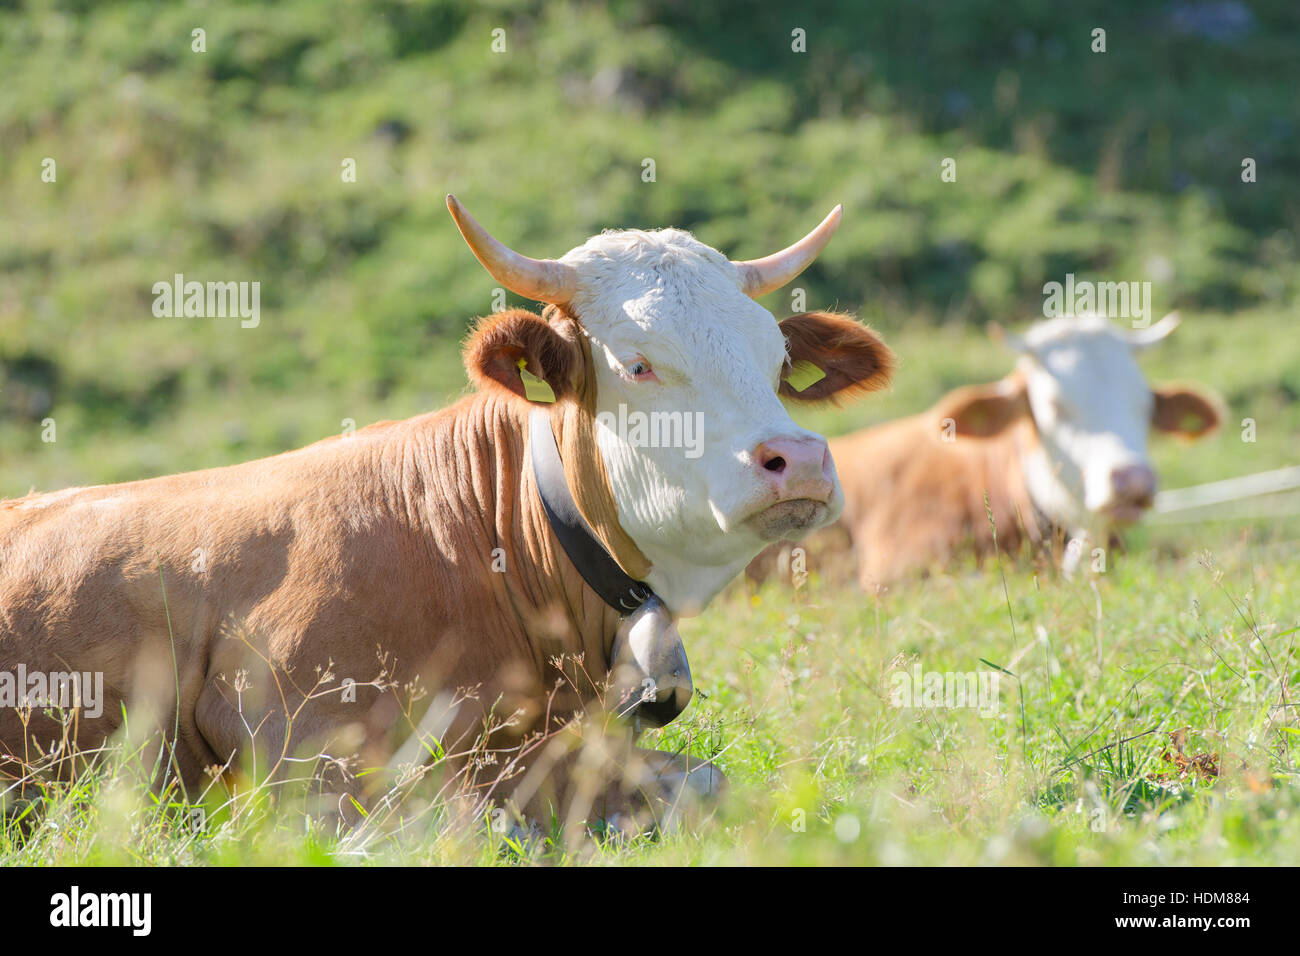 Bulls of Hereford breed lies on sunny highlands Alpine pasture at the foot of Alps mountains Stock Photo